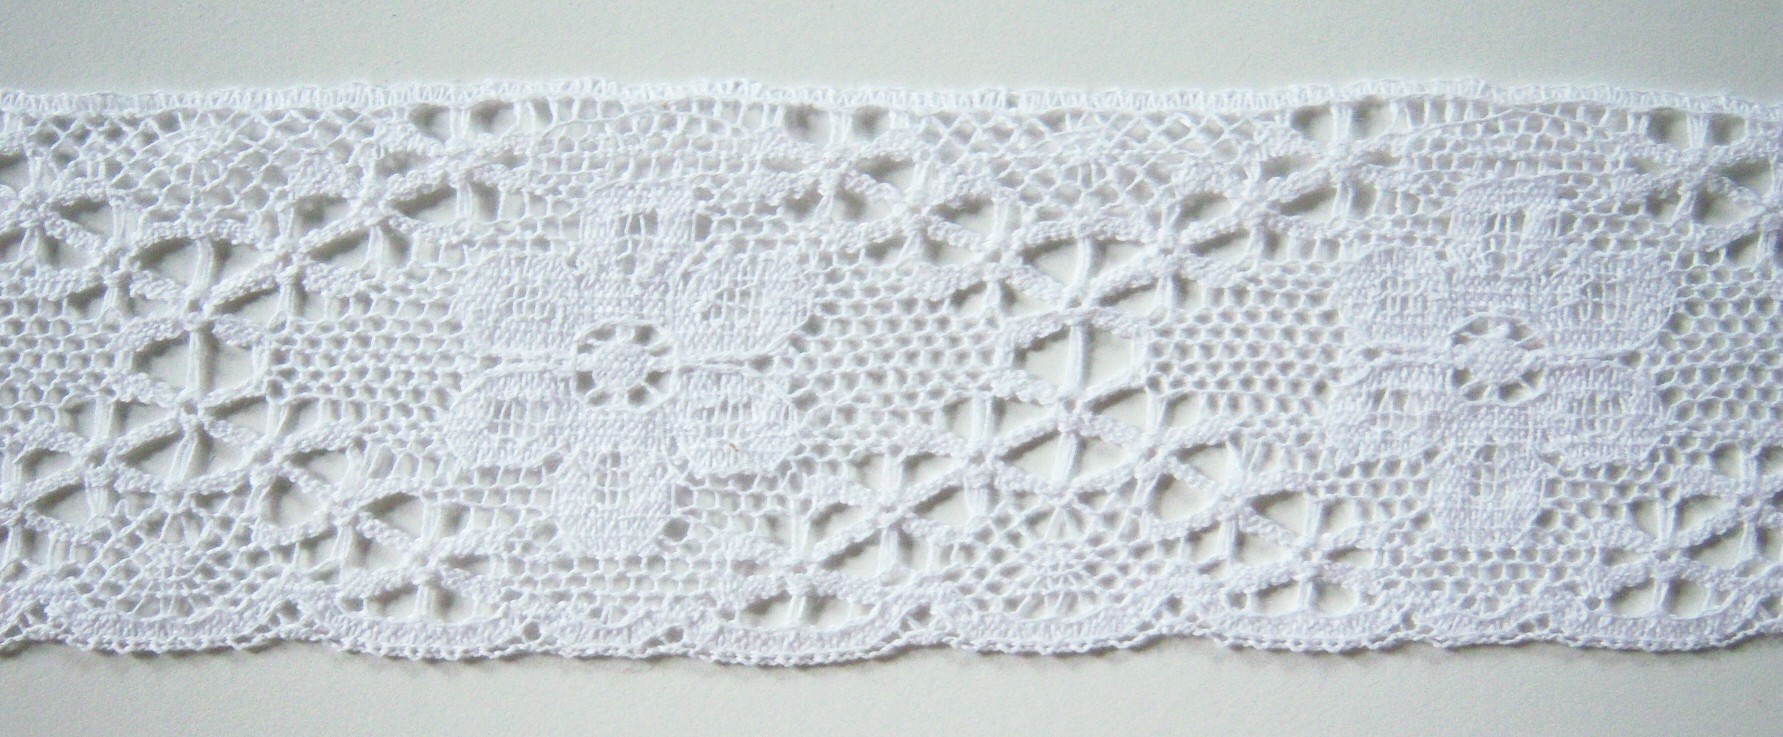 Was White 2 1/4" Cluny Lace